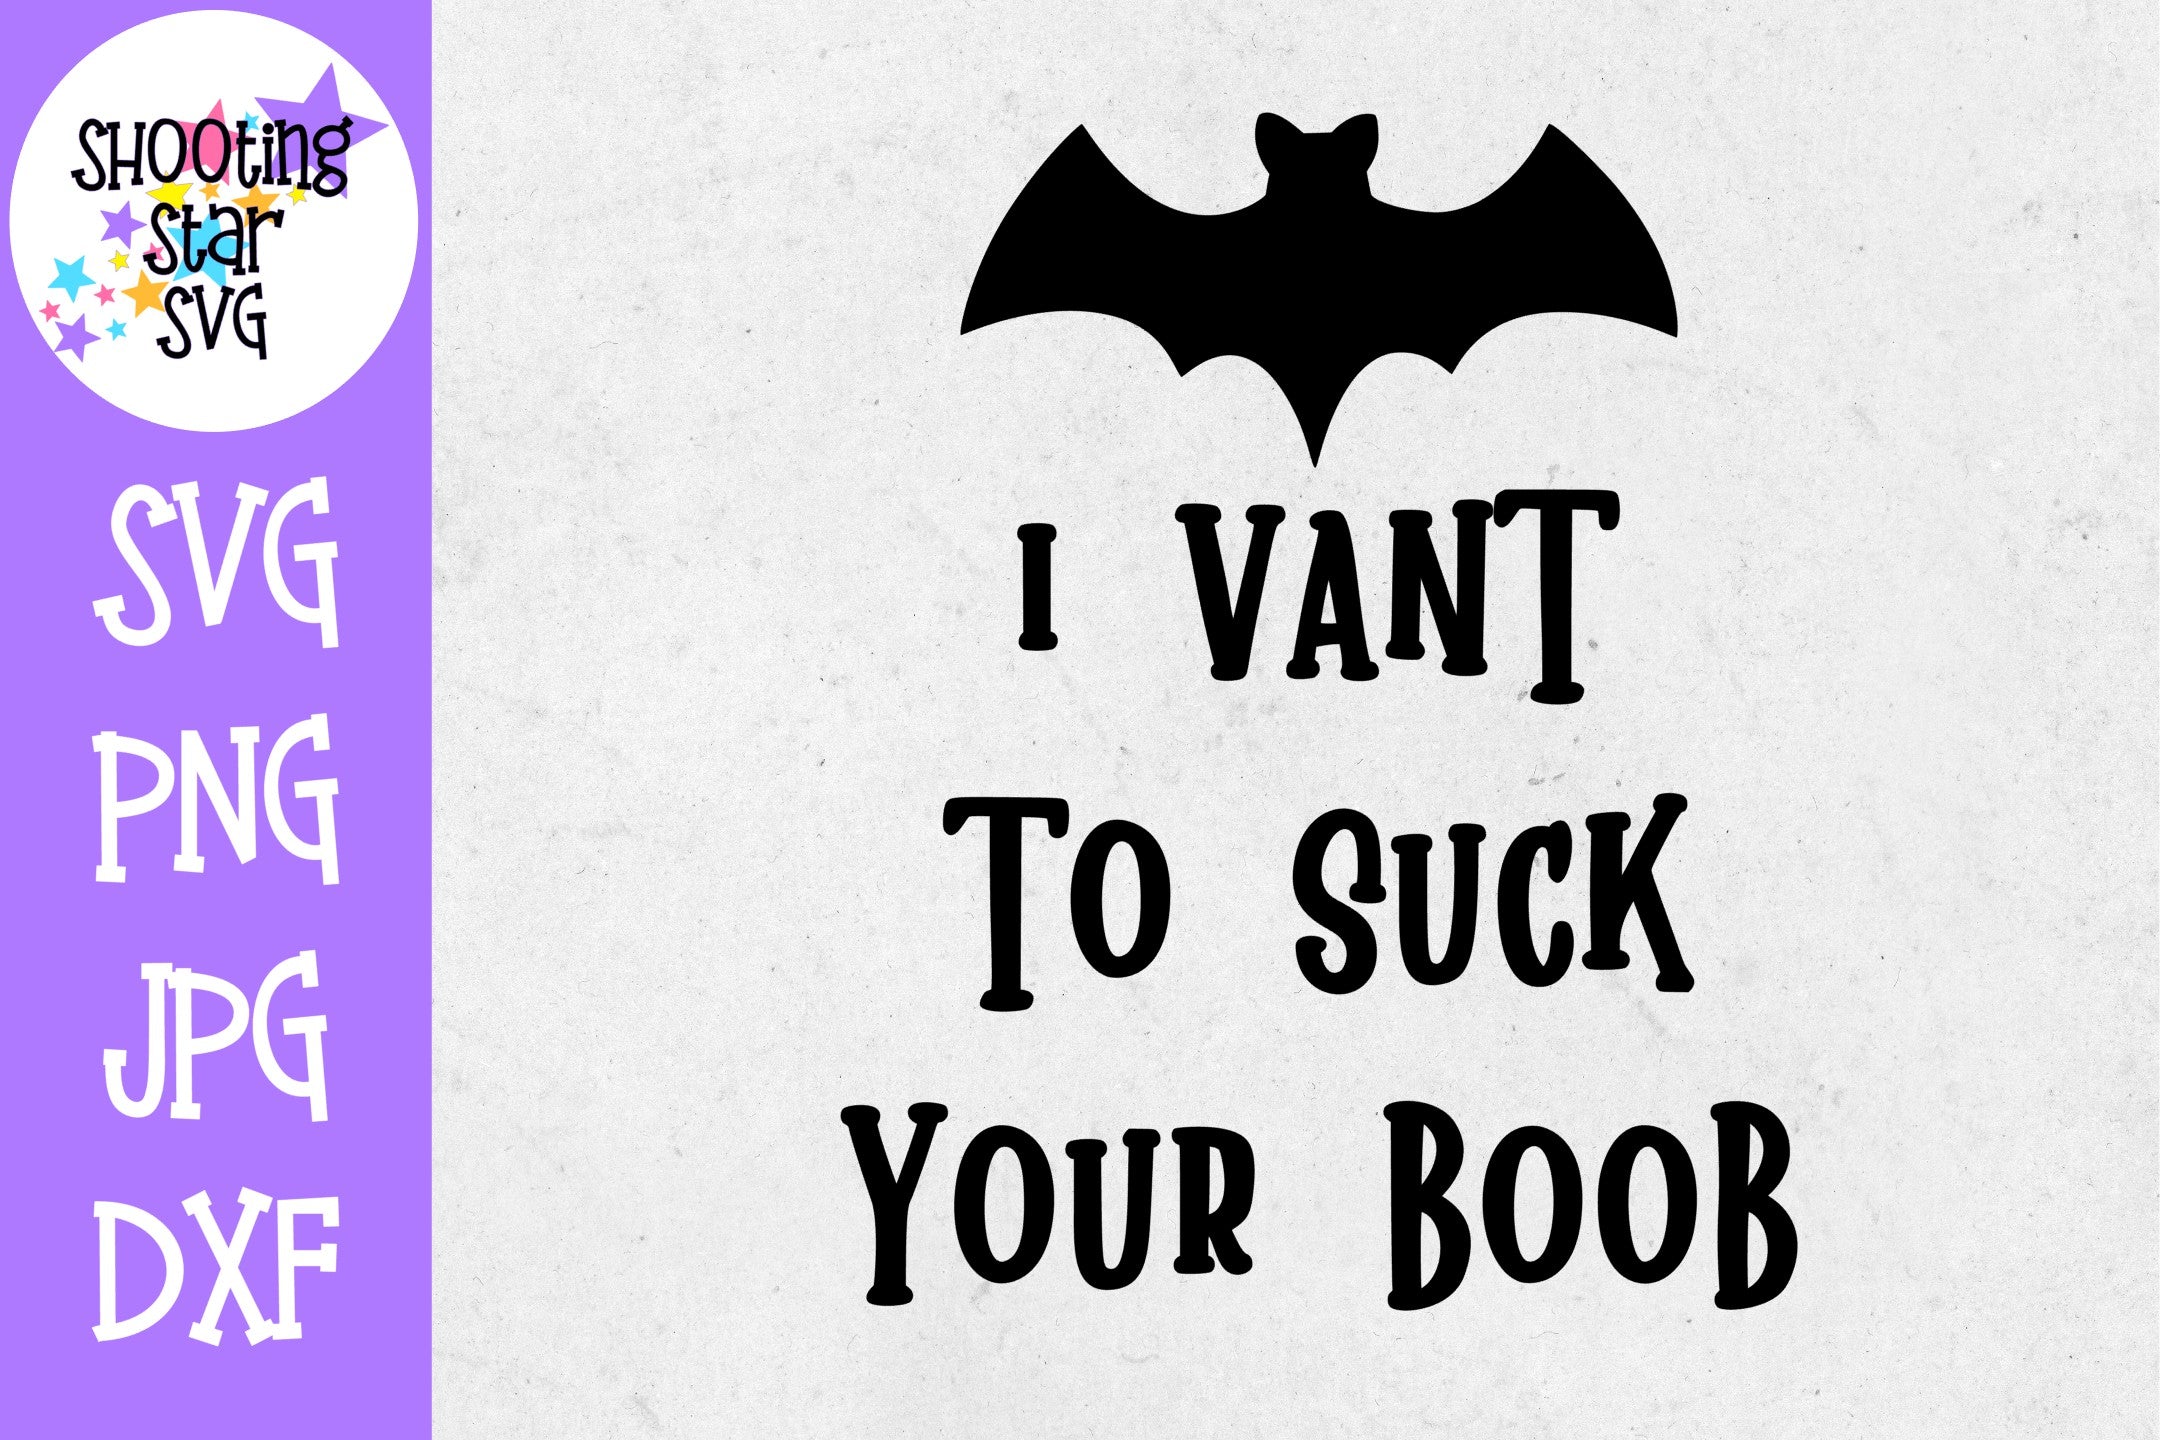 I want to suck your boob SVG - Halloween SVG - Funny SVG